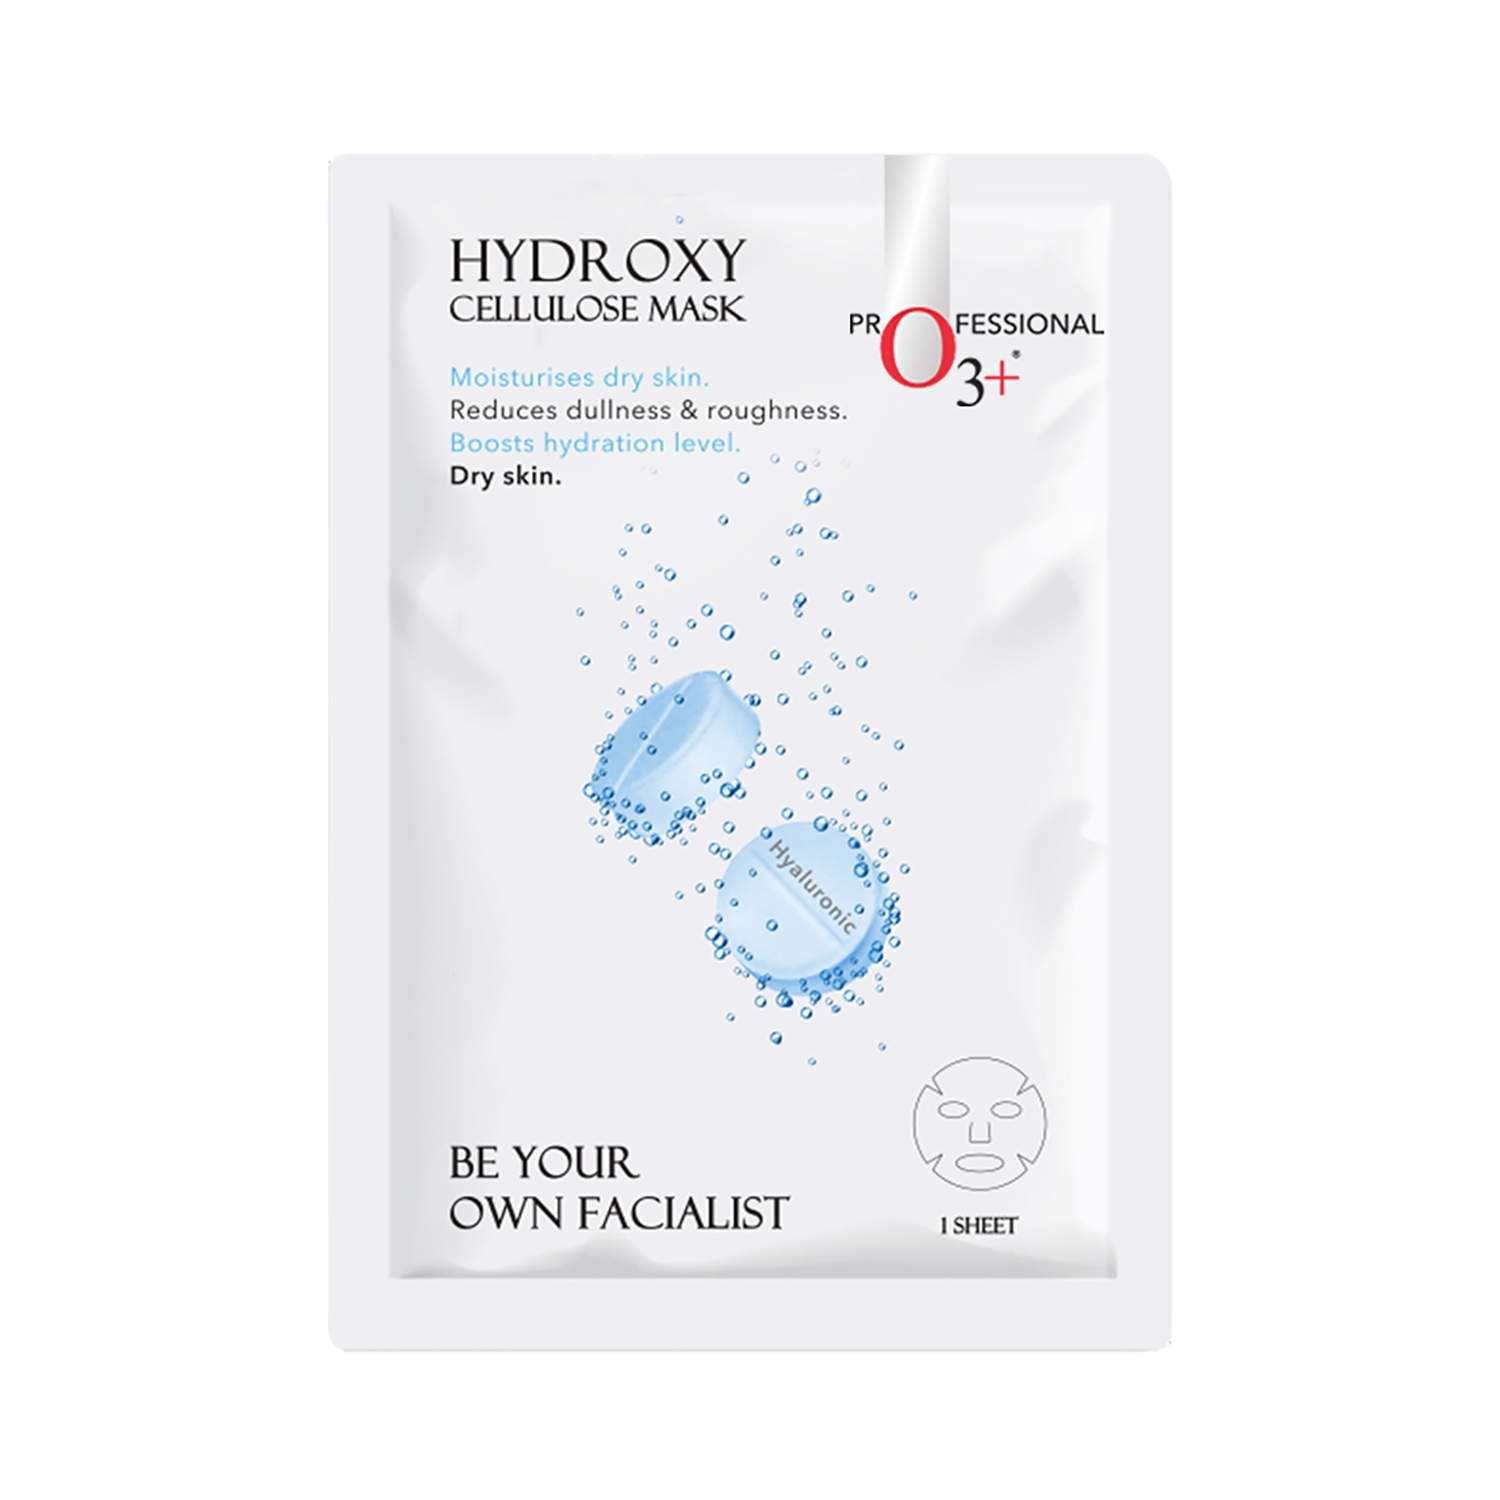 O3+ Facialist Hyaluronic Hydroxy Cellulose Mask (30g)